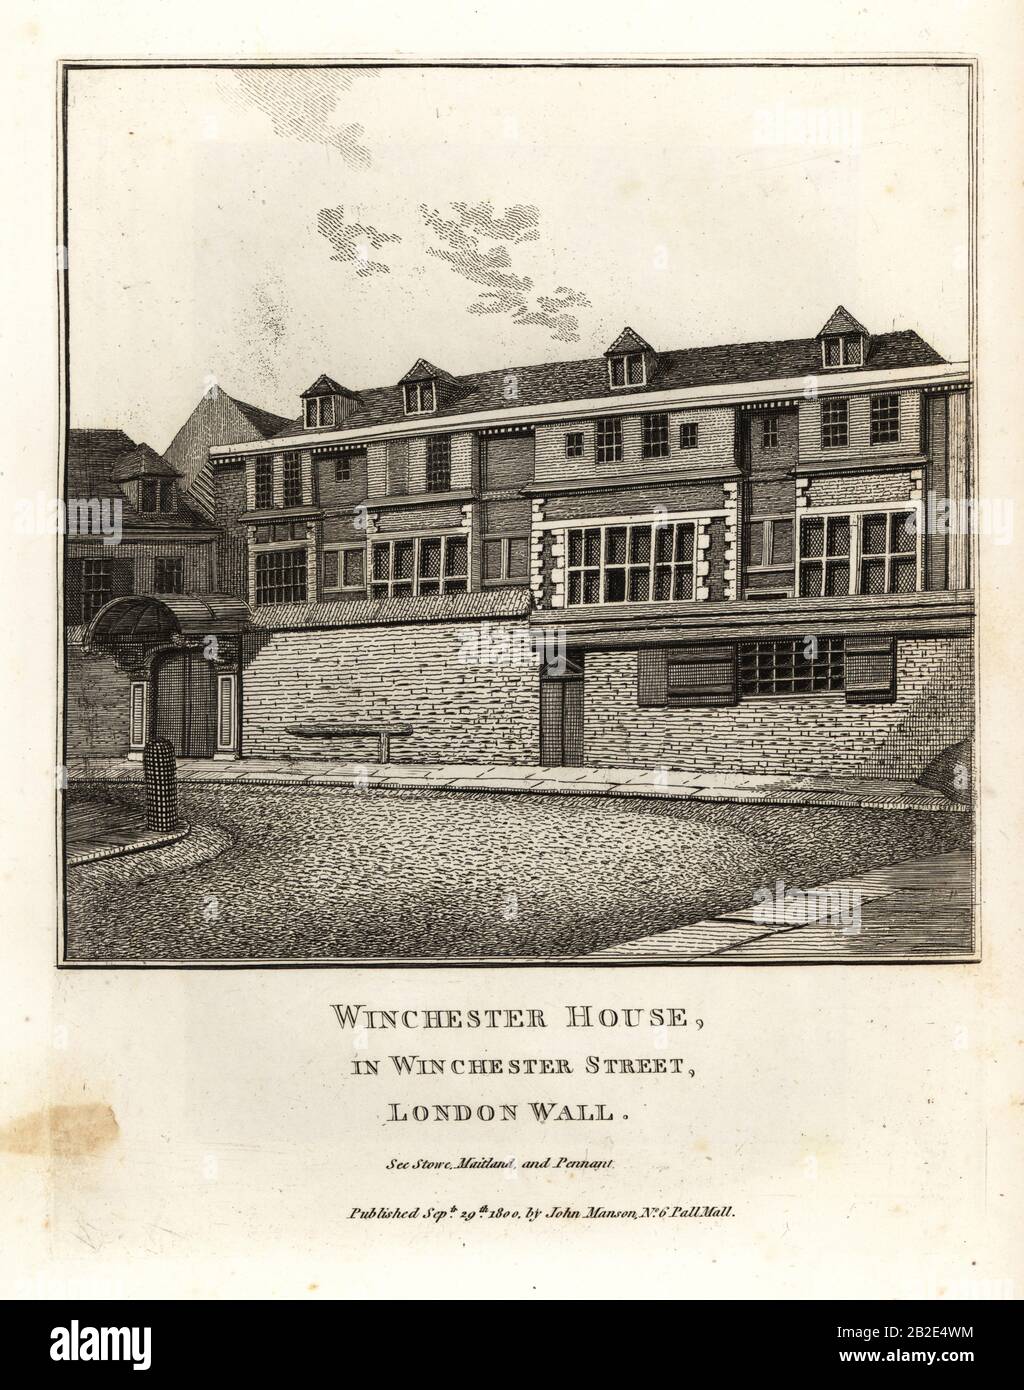 Winchester House in Winchester Street, London Wall. Copperplate engraving by John Thomas Smith after original drawings by members of the Society of Antiquaries from his J.T. Smith’s Antiquities of London and its Environs, J. Sewell, R. Folder, J. Simco, London, 1800. Stock Photo